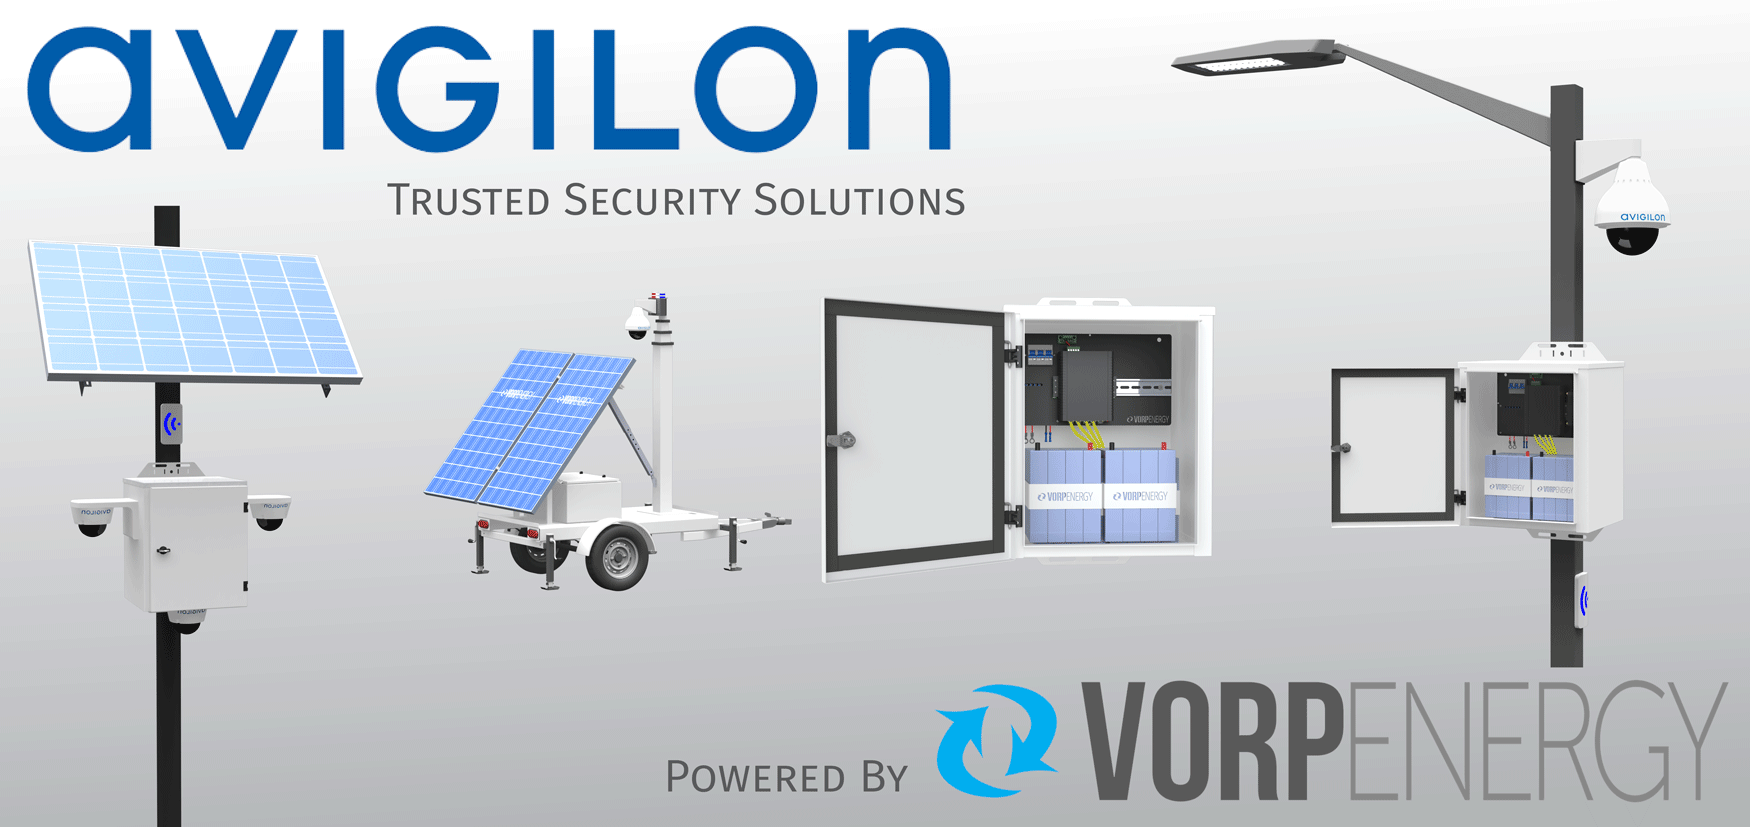 Avigilon Security Solutions Powered by Vorp Energy